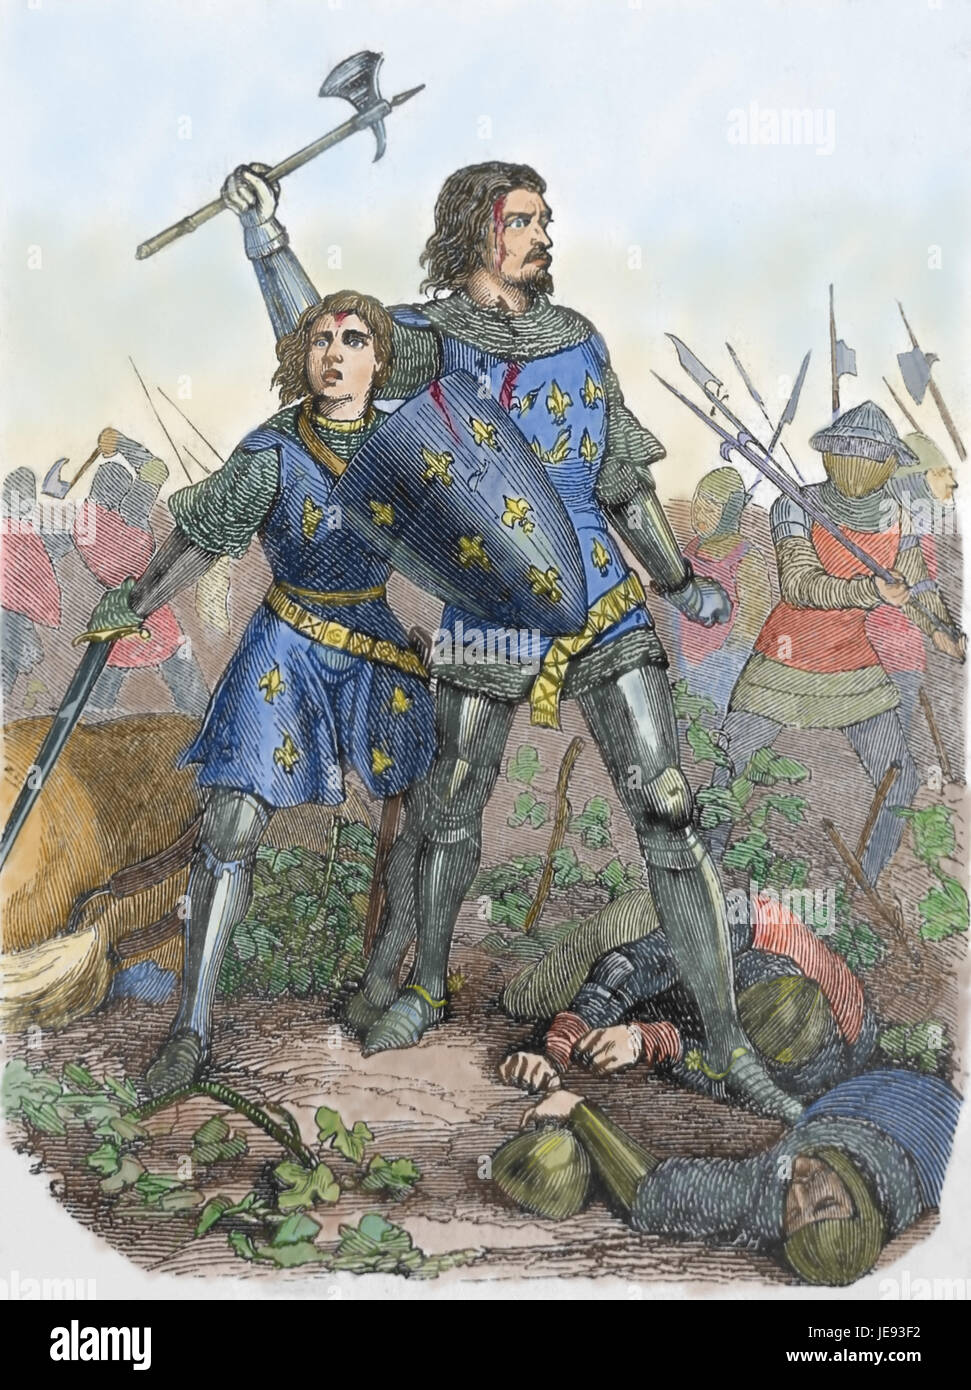 John II of France (1319-1364) 14th. Century and his son Philip II, Duke of Burguyndy captured in the Battle of Poitiers (1356). Later colouration. Stock Photo